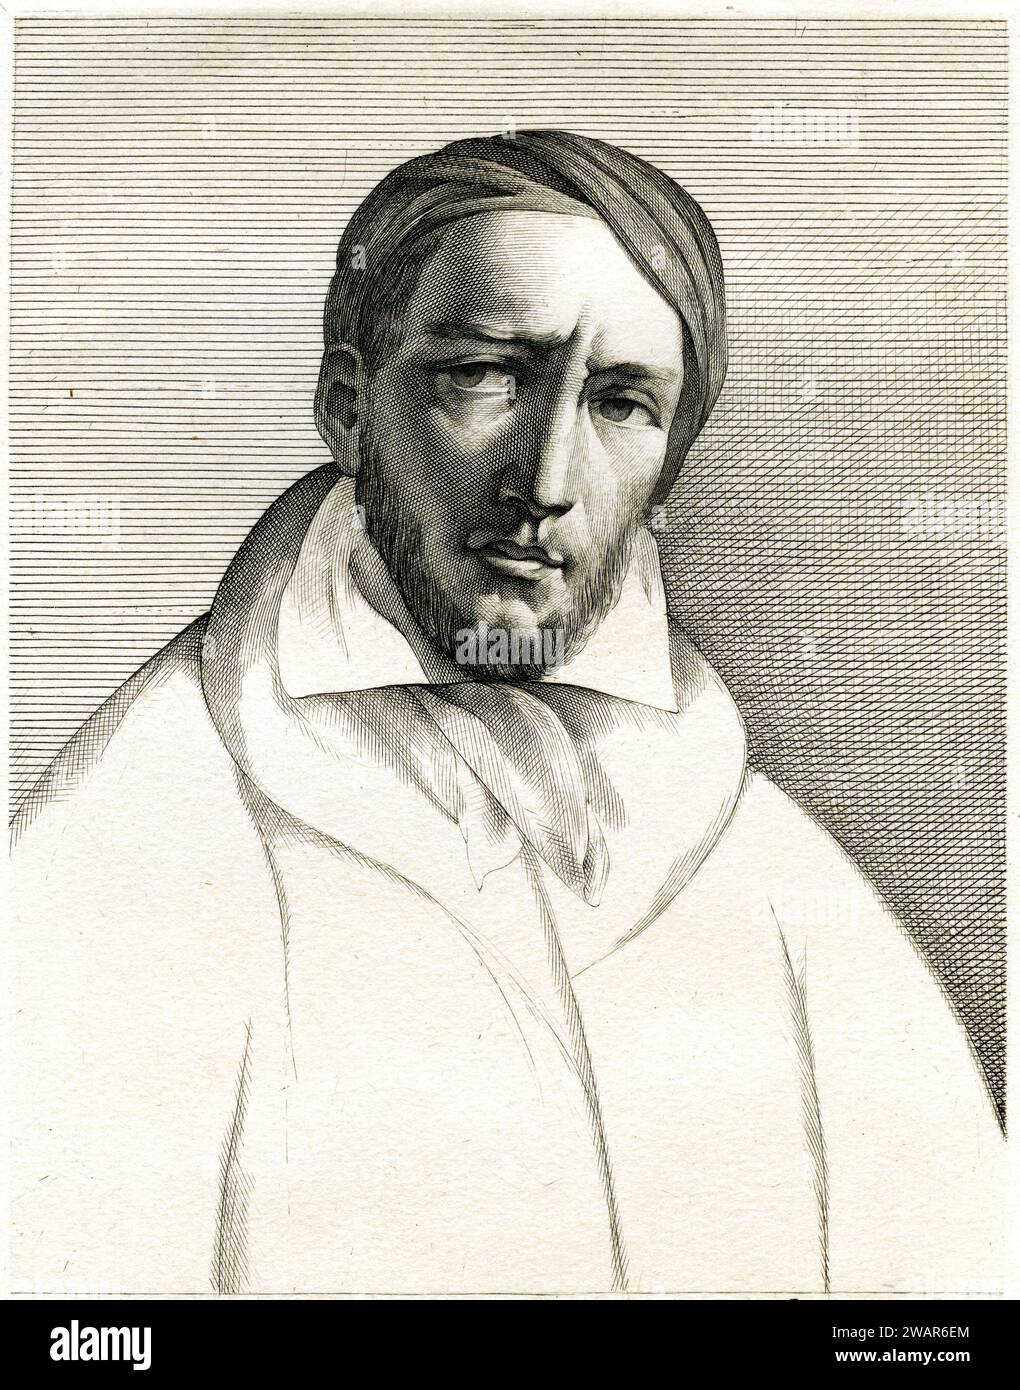 Portrait of Théodore Géricault (1791-1824) French Painter (c19th engraving) Vintage or Historical Illustration Stock Photo